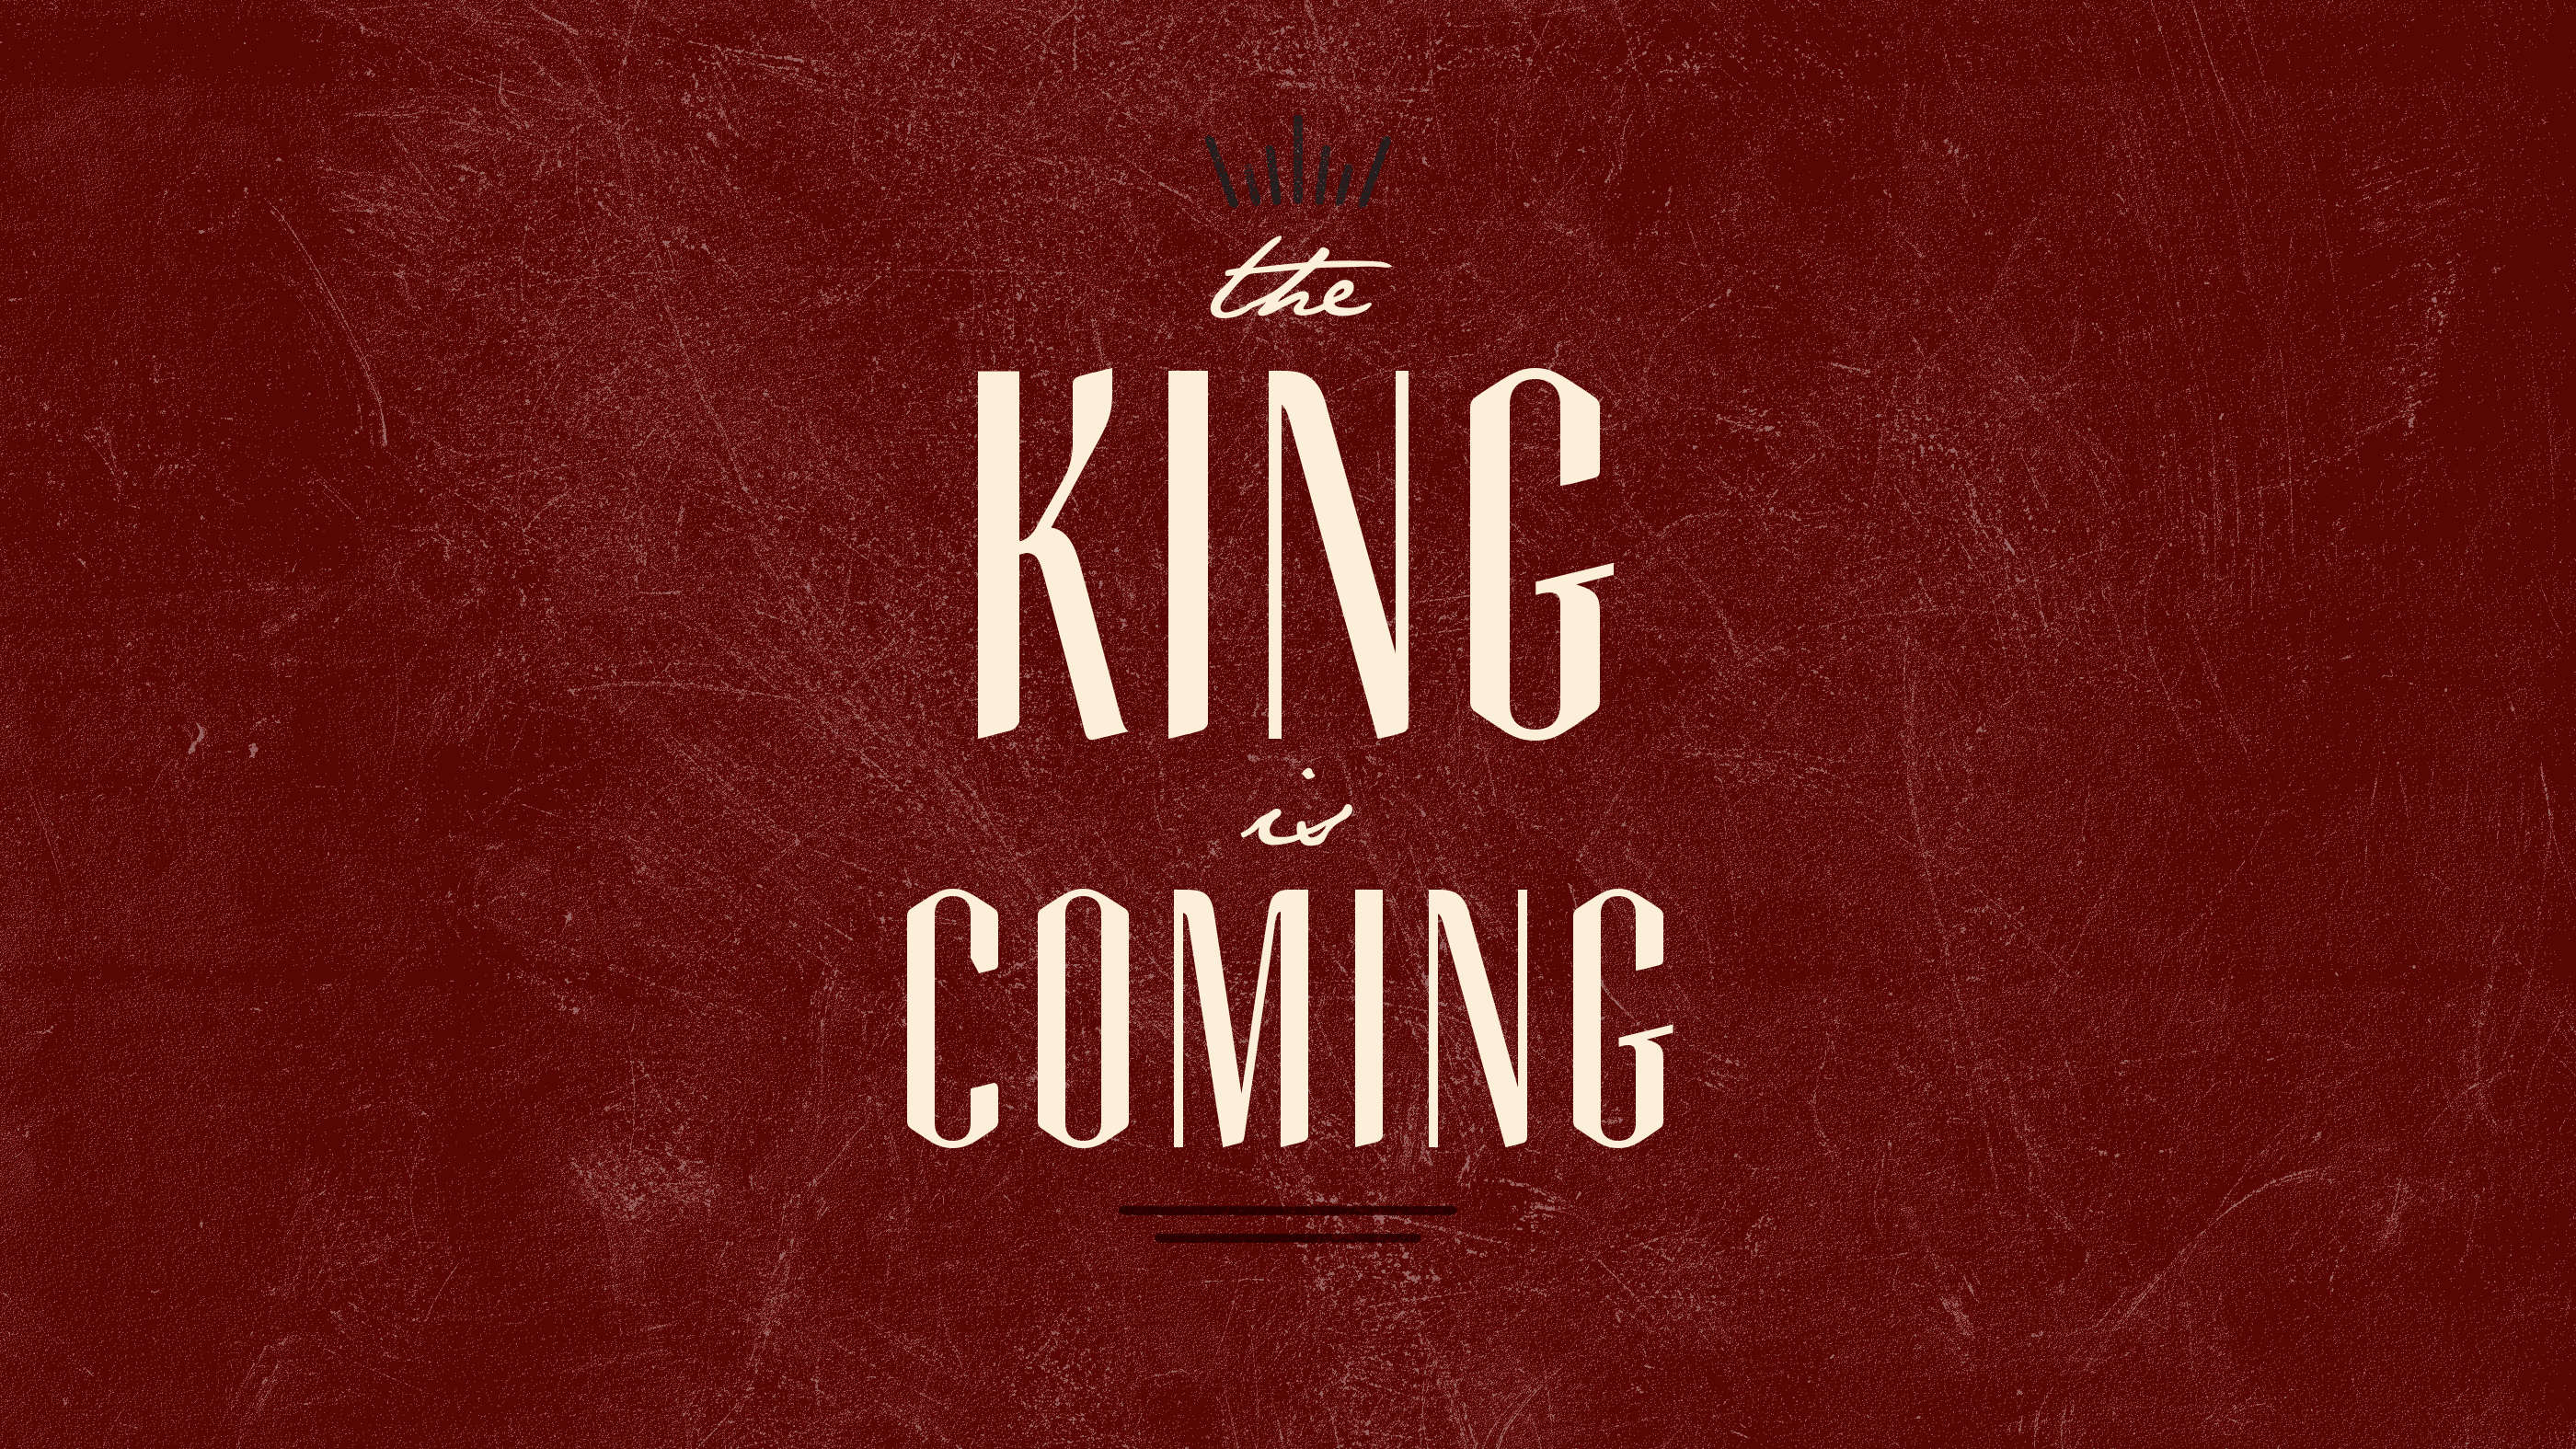 The King is Coming